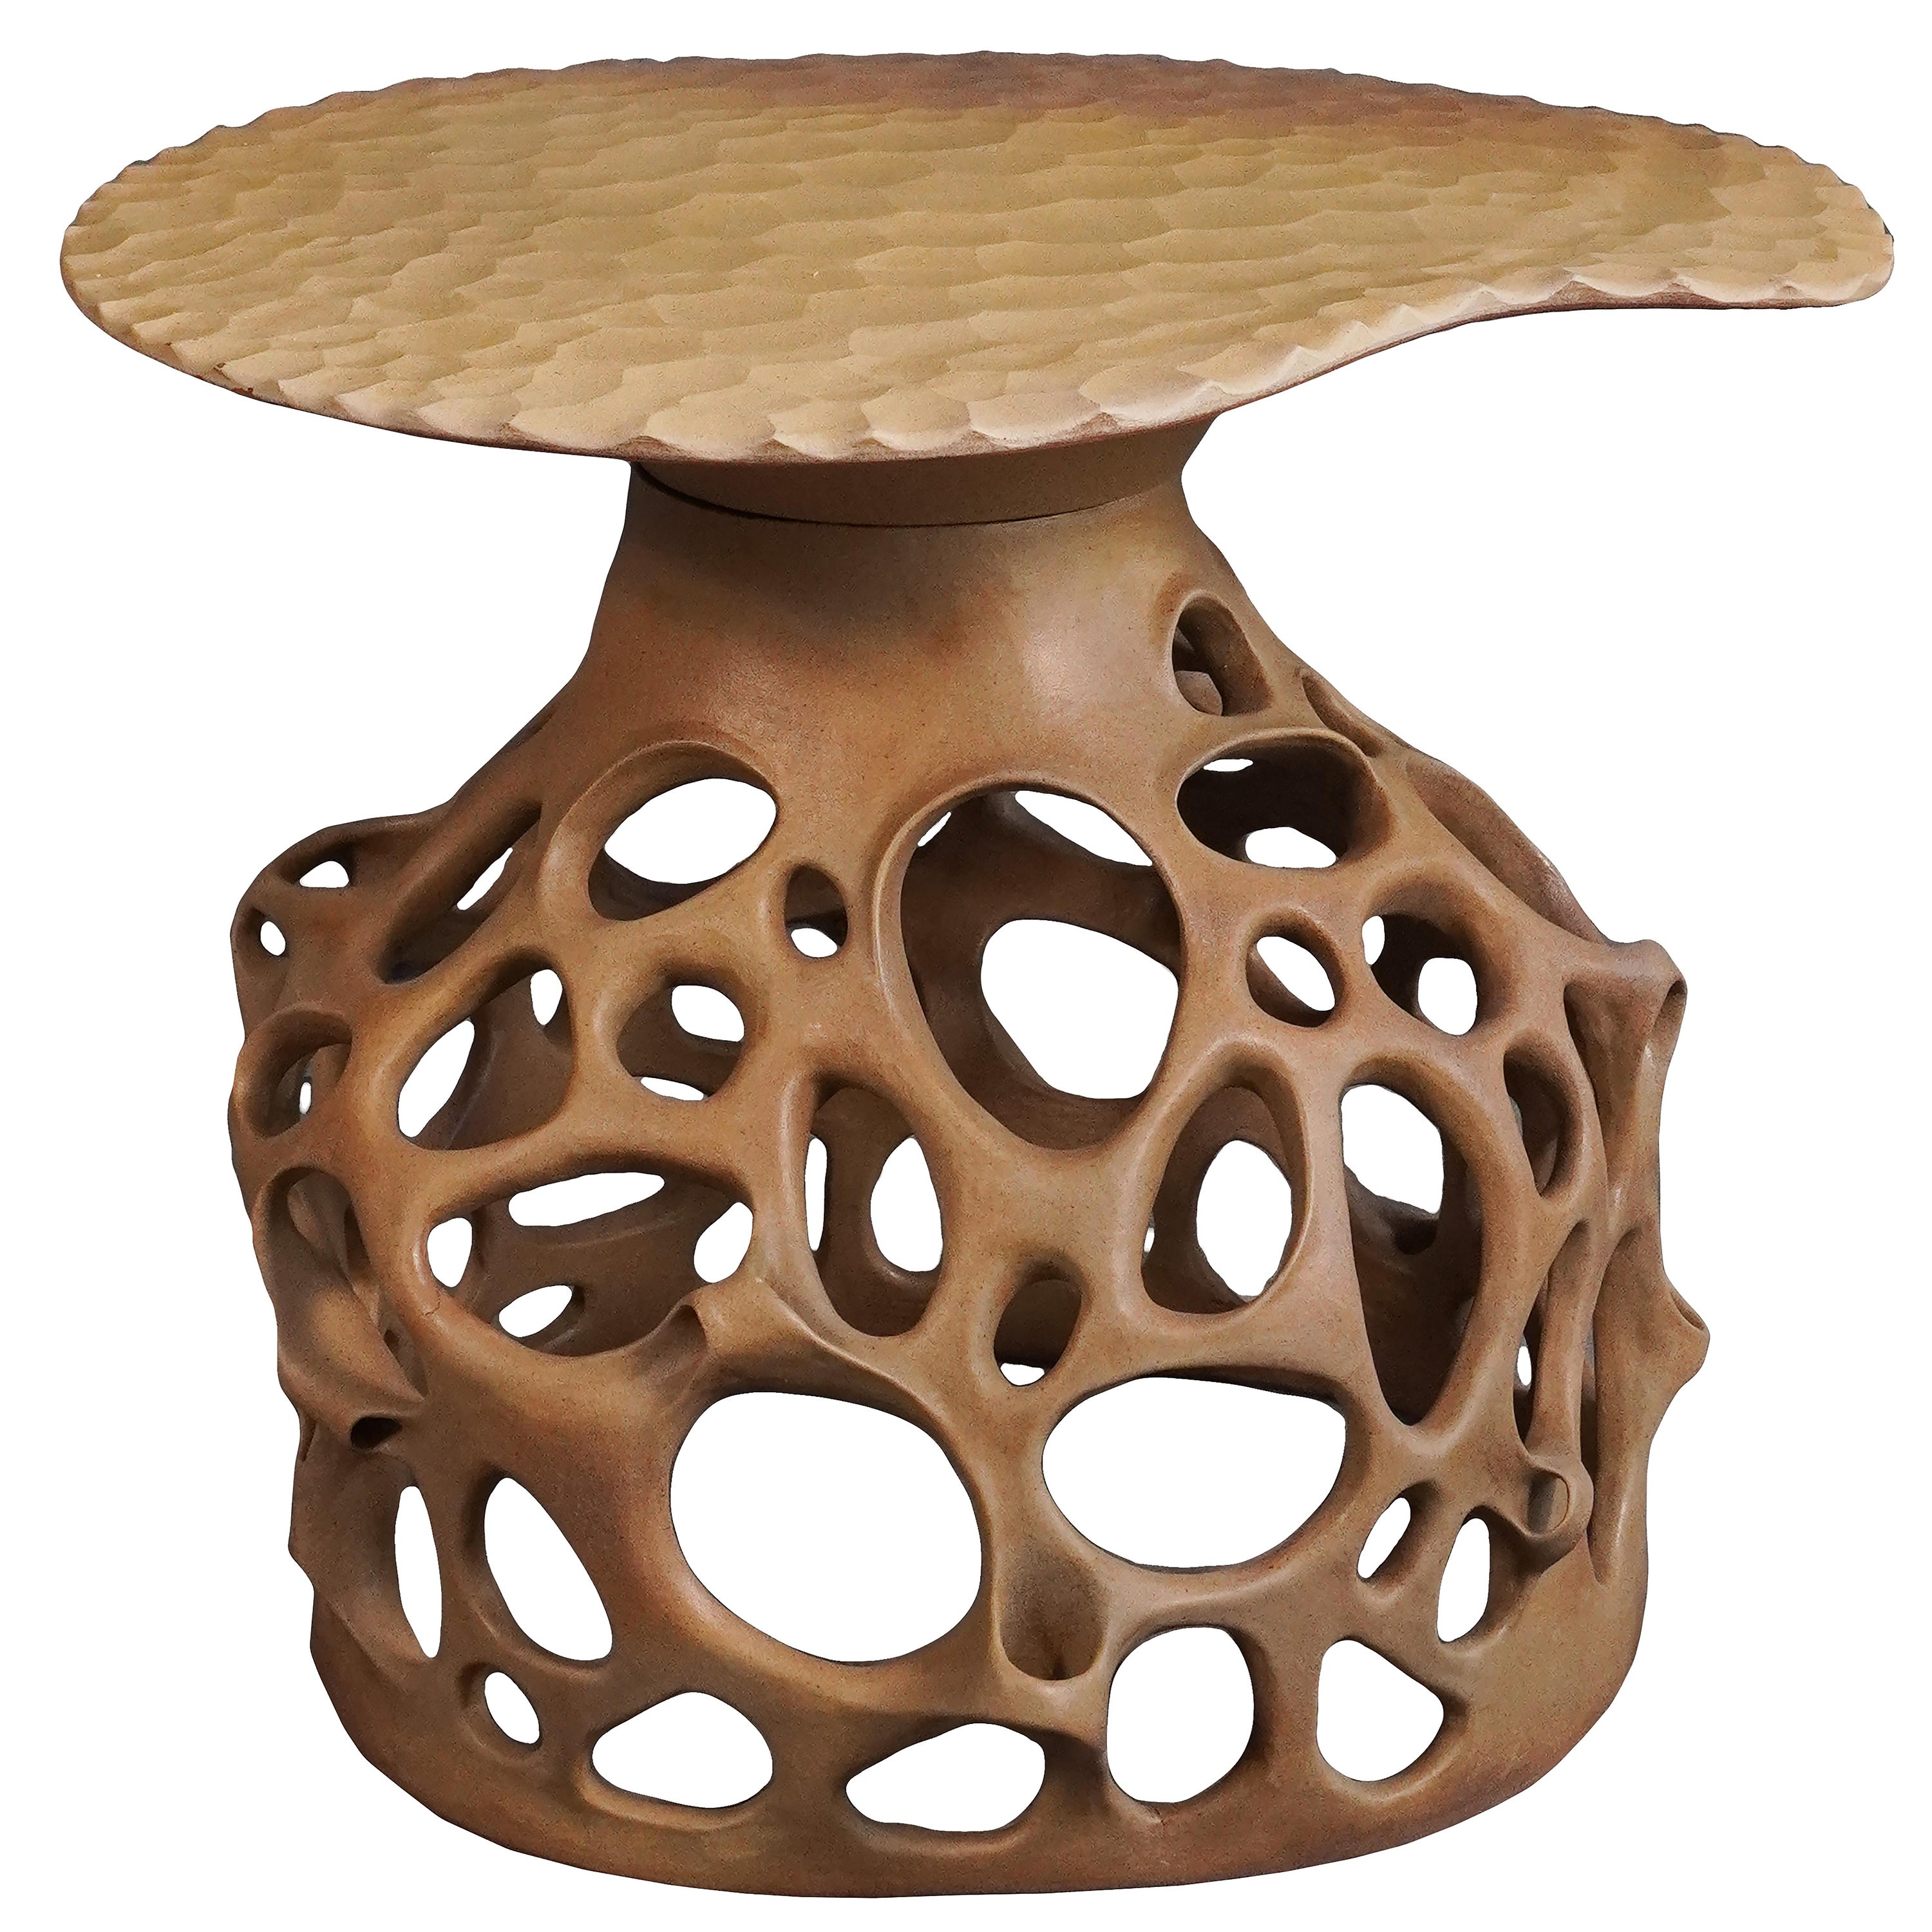 Unique Side Table Fungi Handmade by Jan Ernst